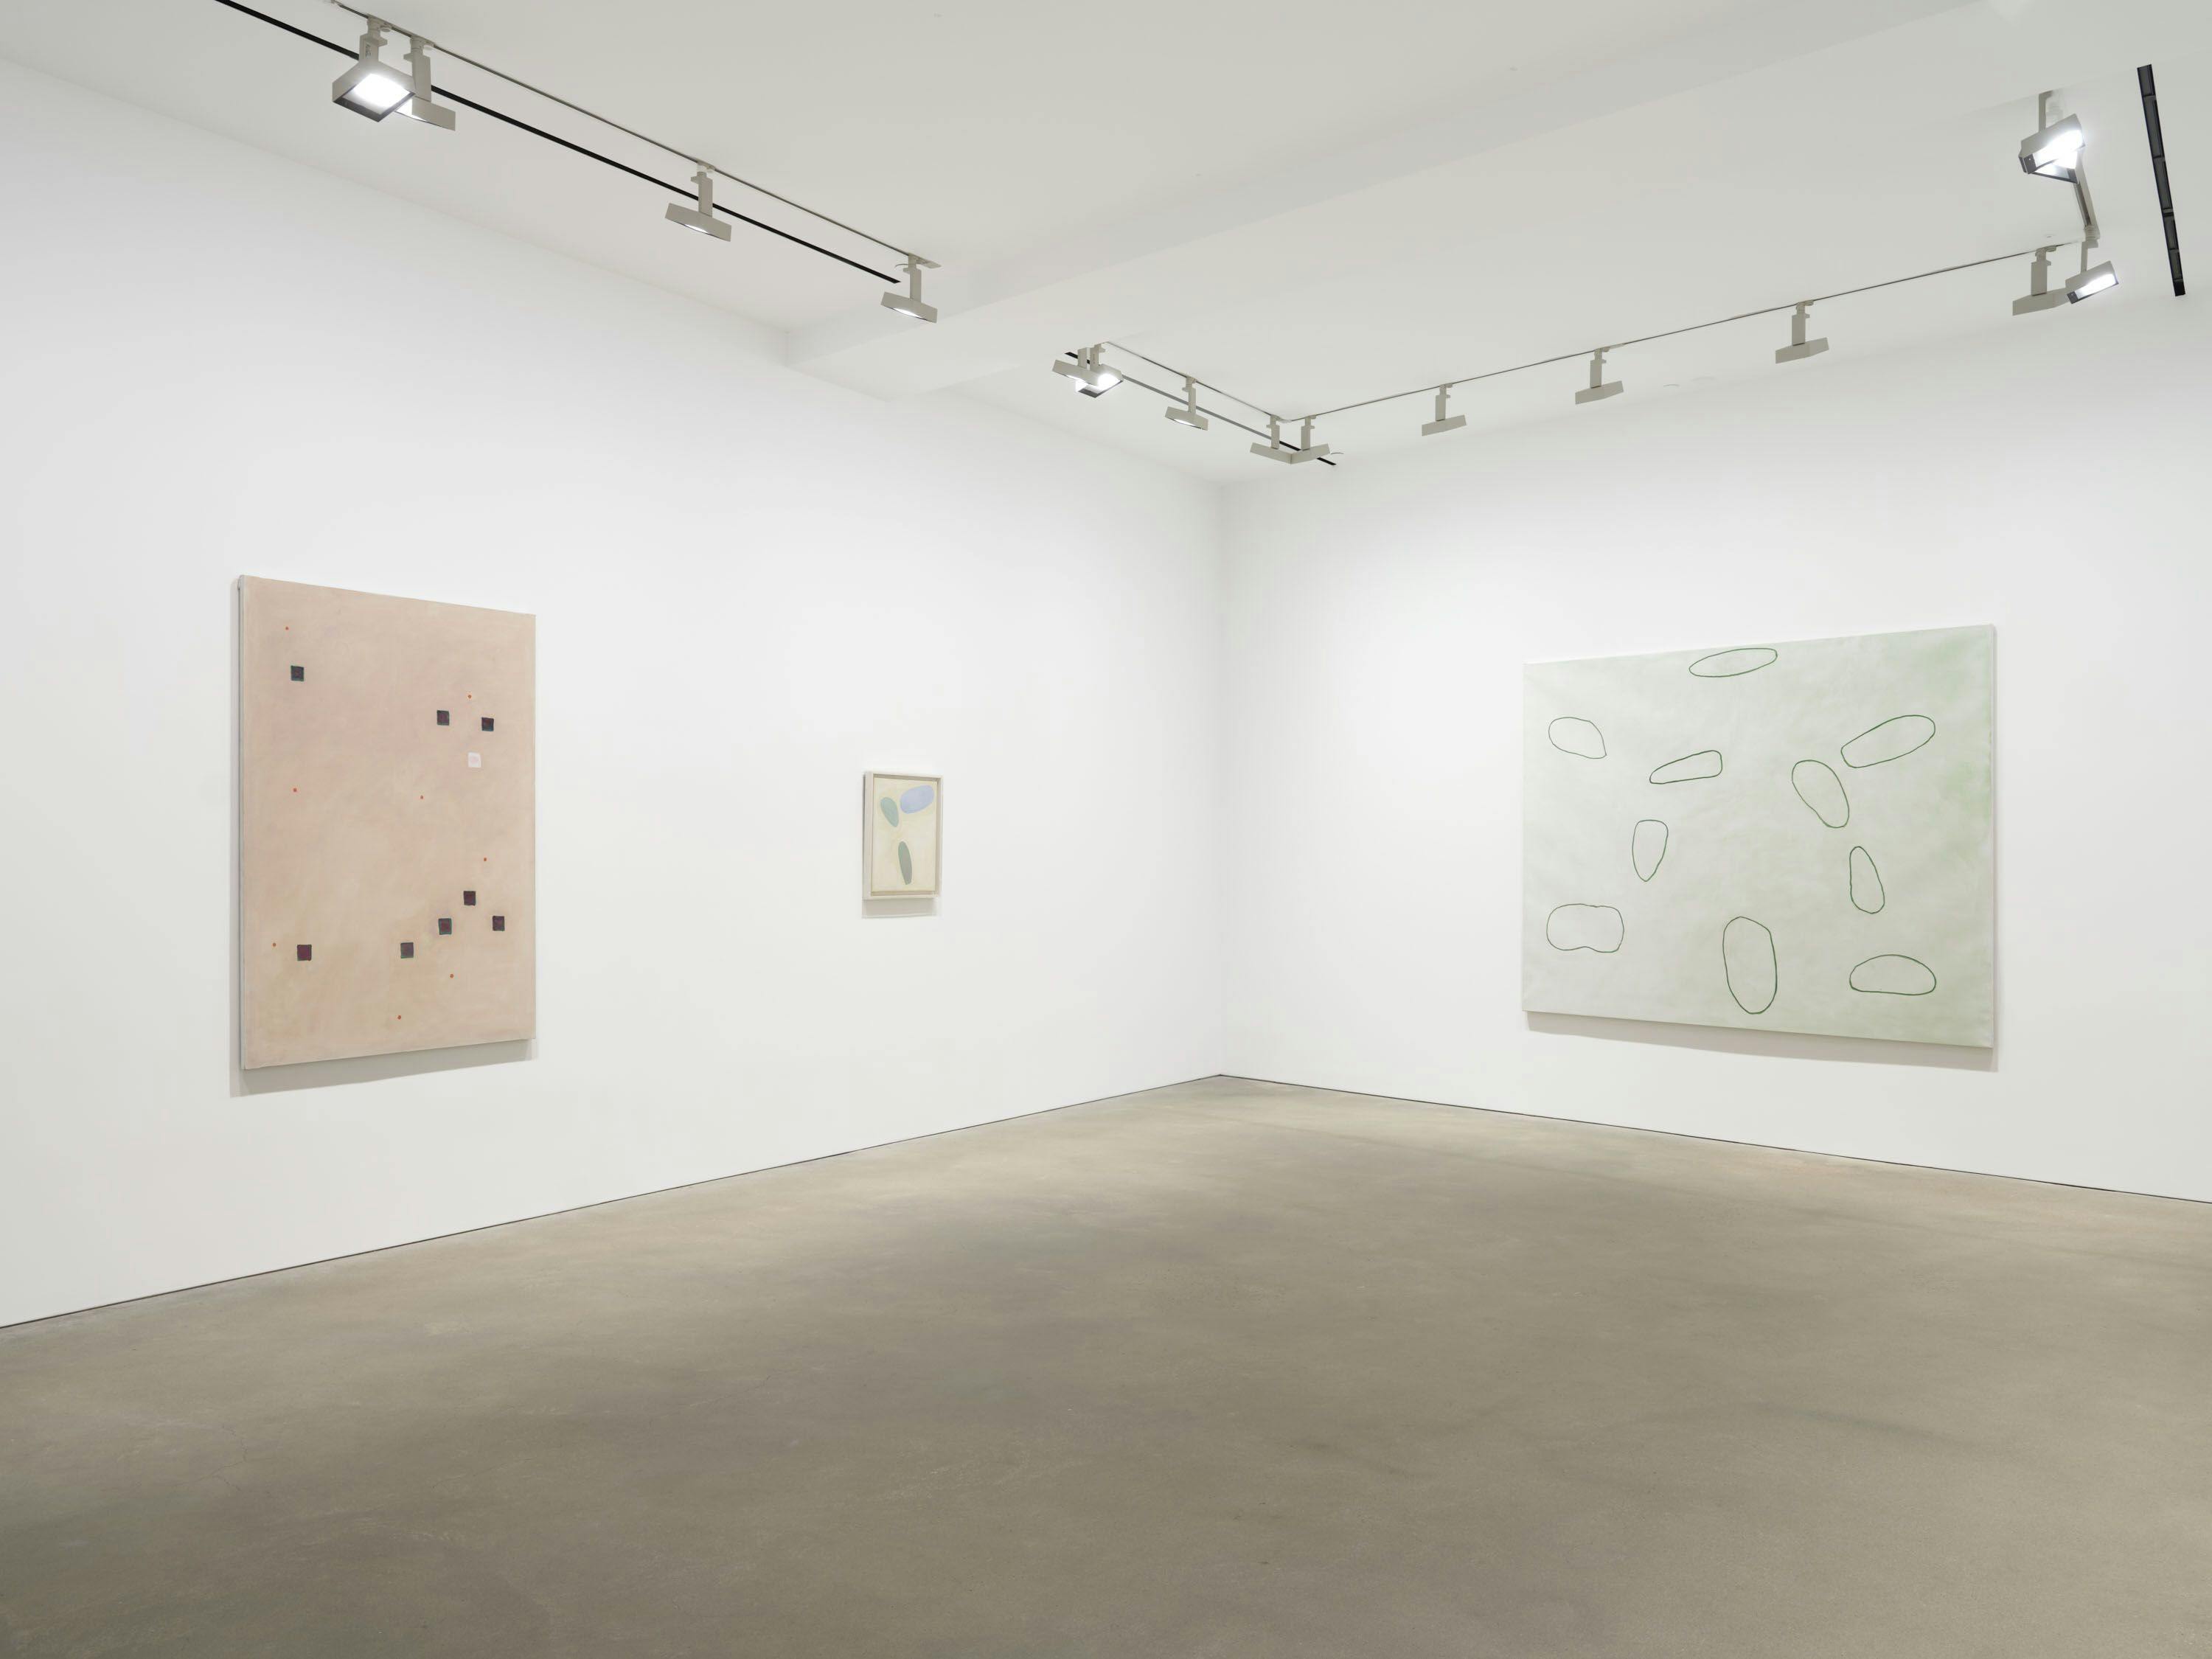 An installation view of the exhibition, Raoul de Keyser: Replay Again, at David Zwirner in Hong Kong, dated 2022.